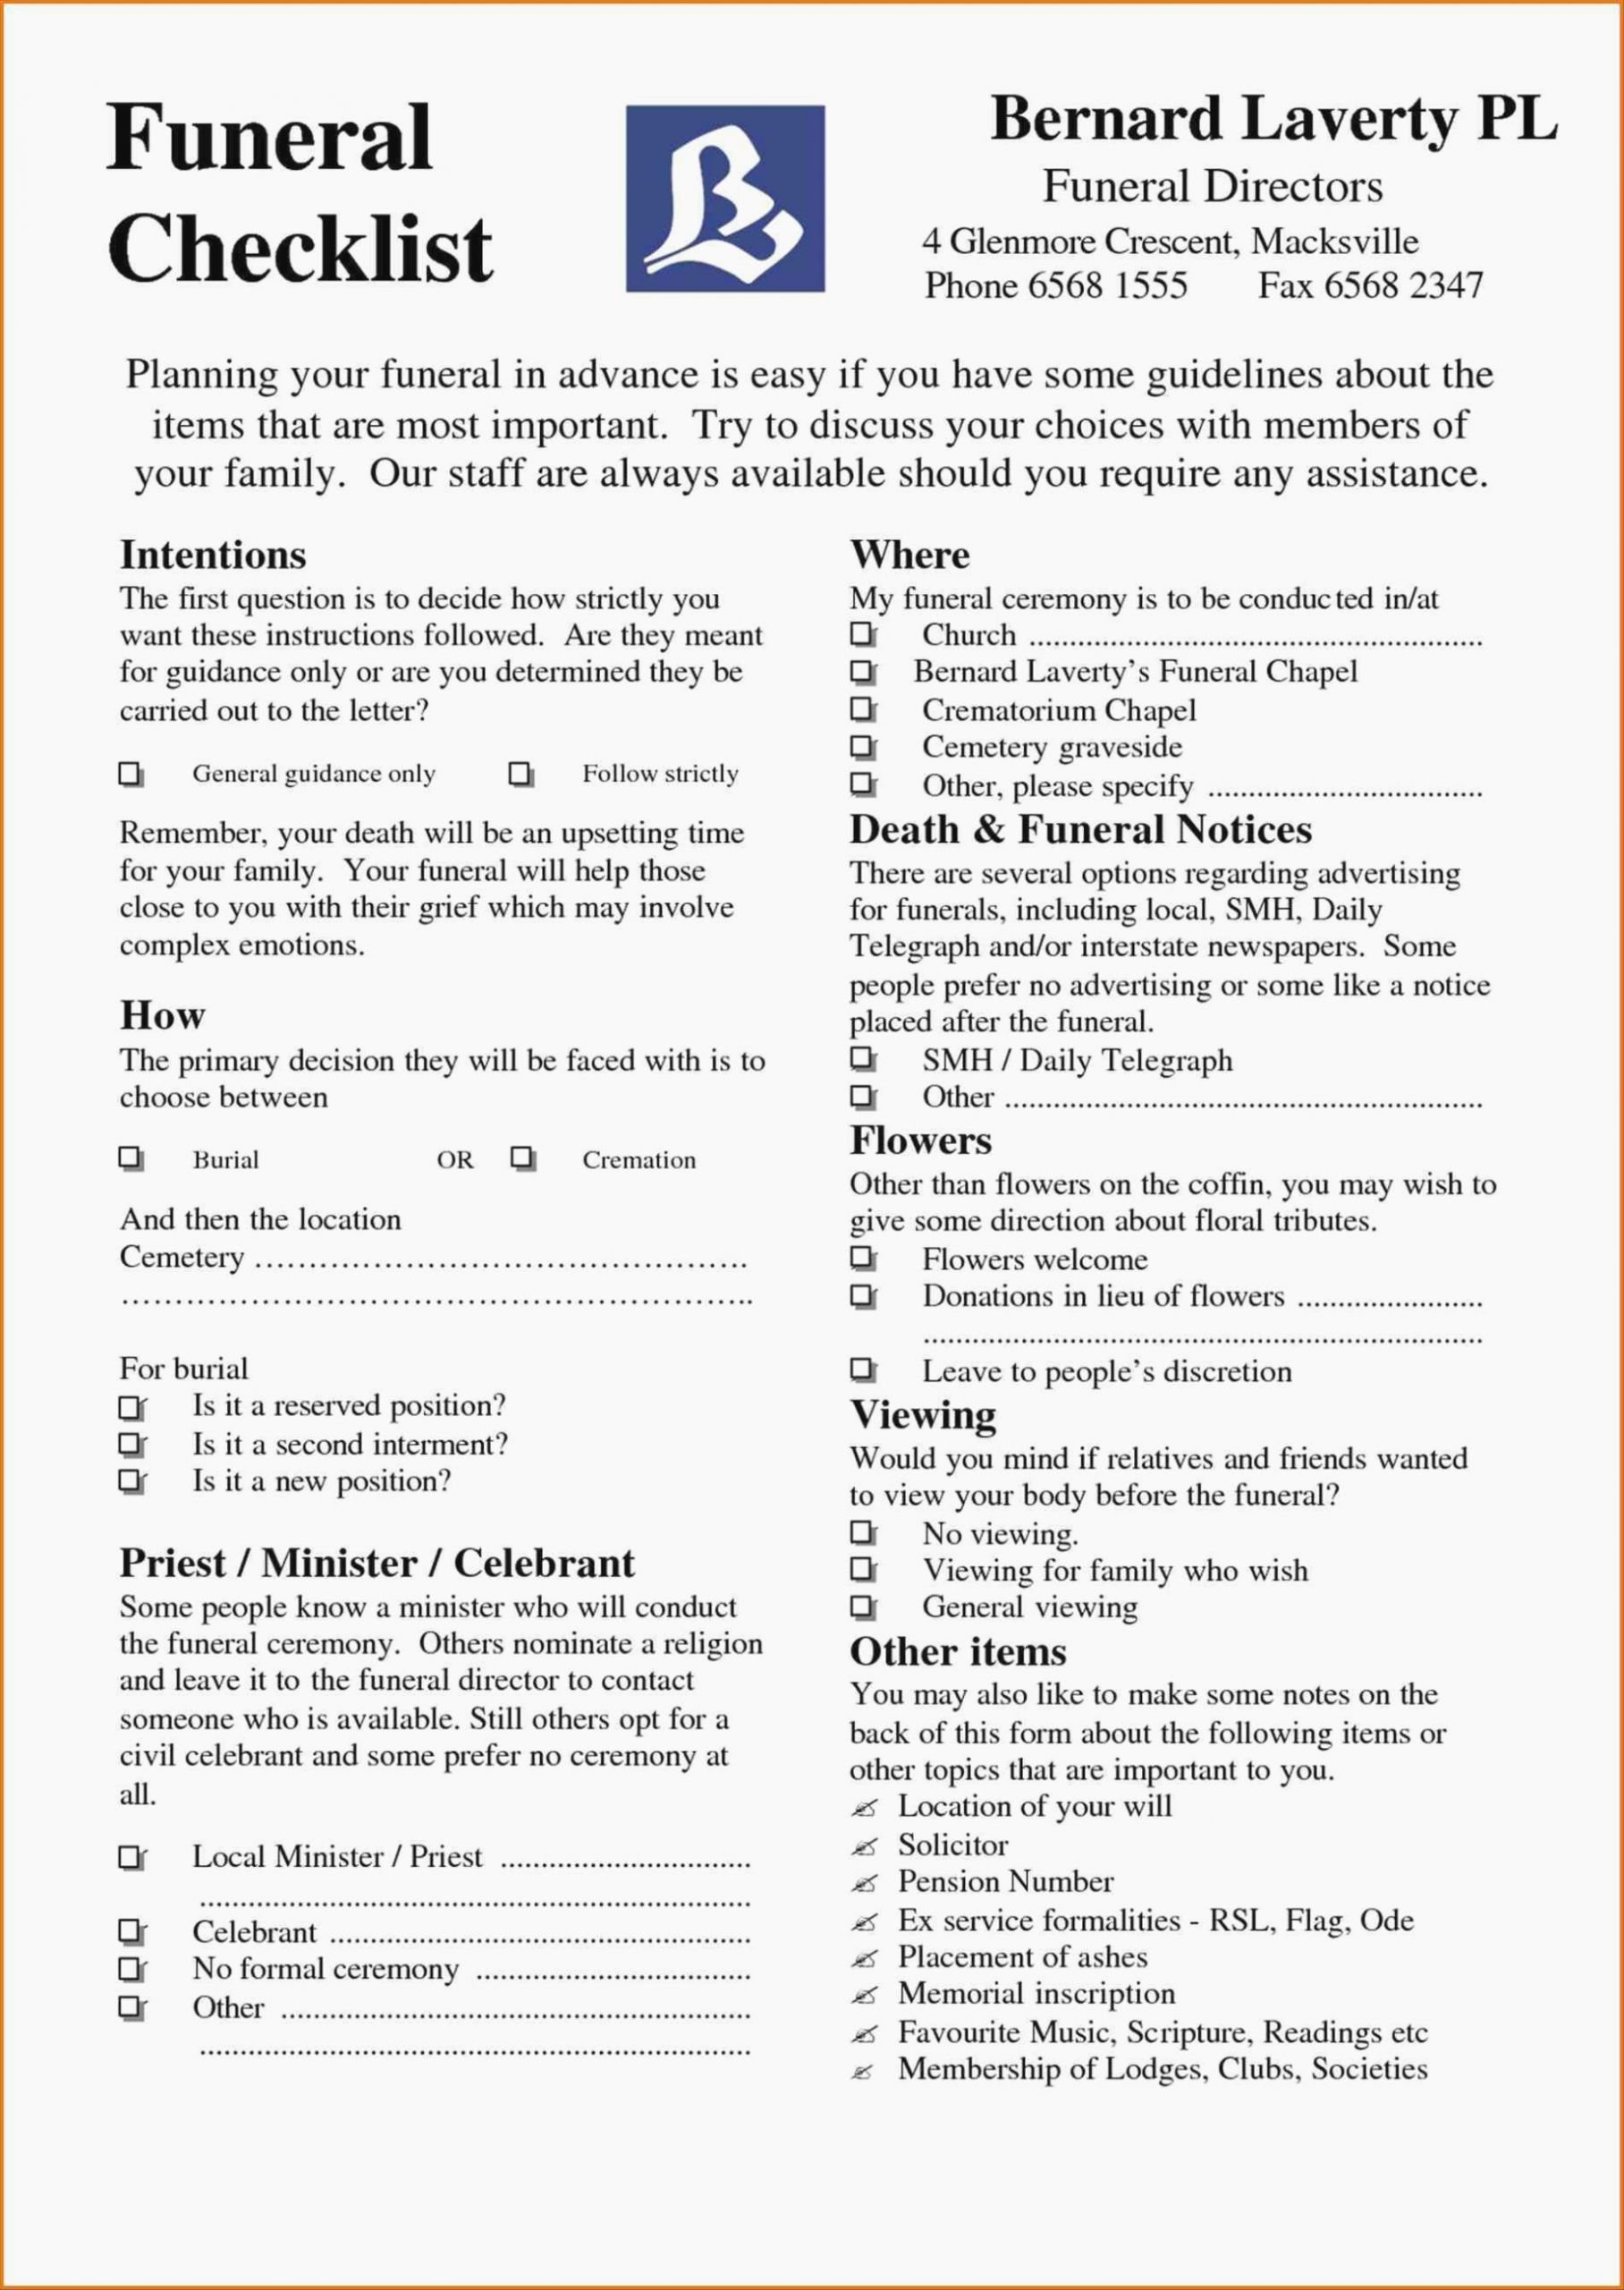 Funeral Planning Checklist Template Luxury Ten Things You Need to